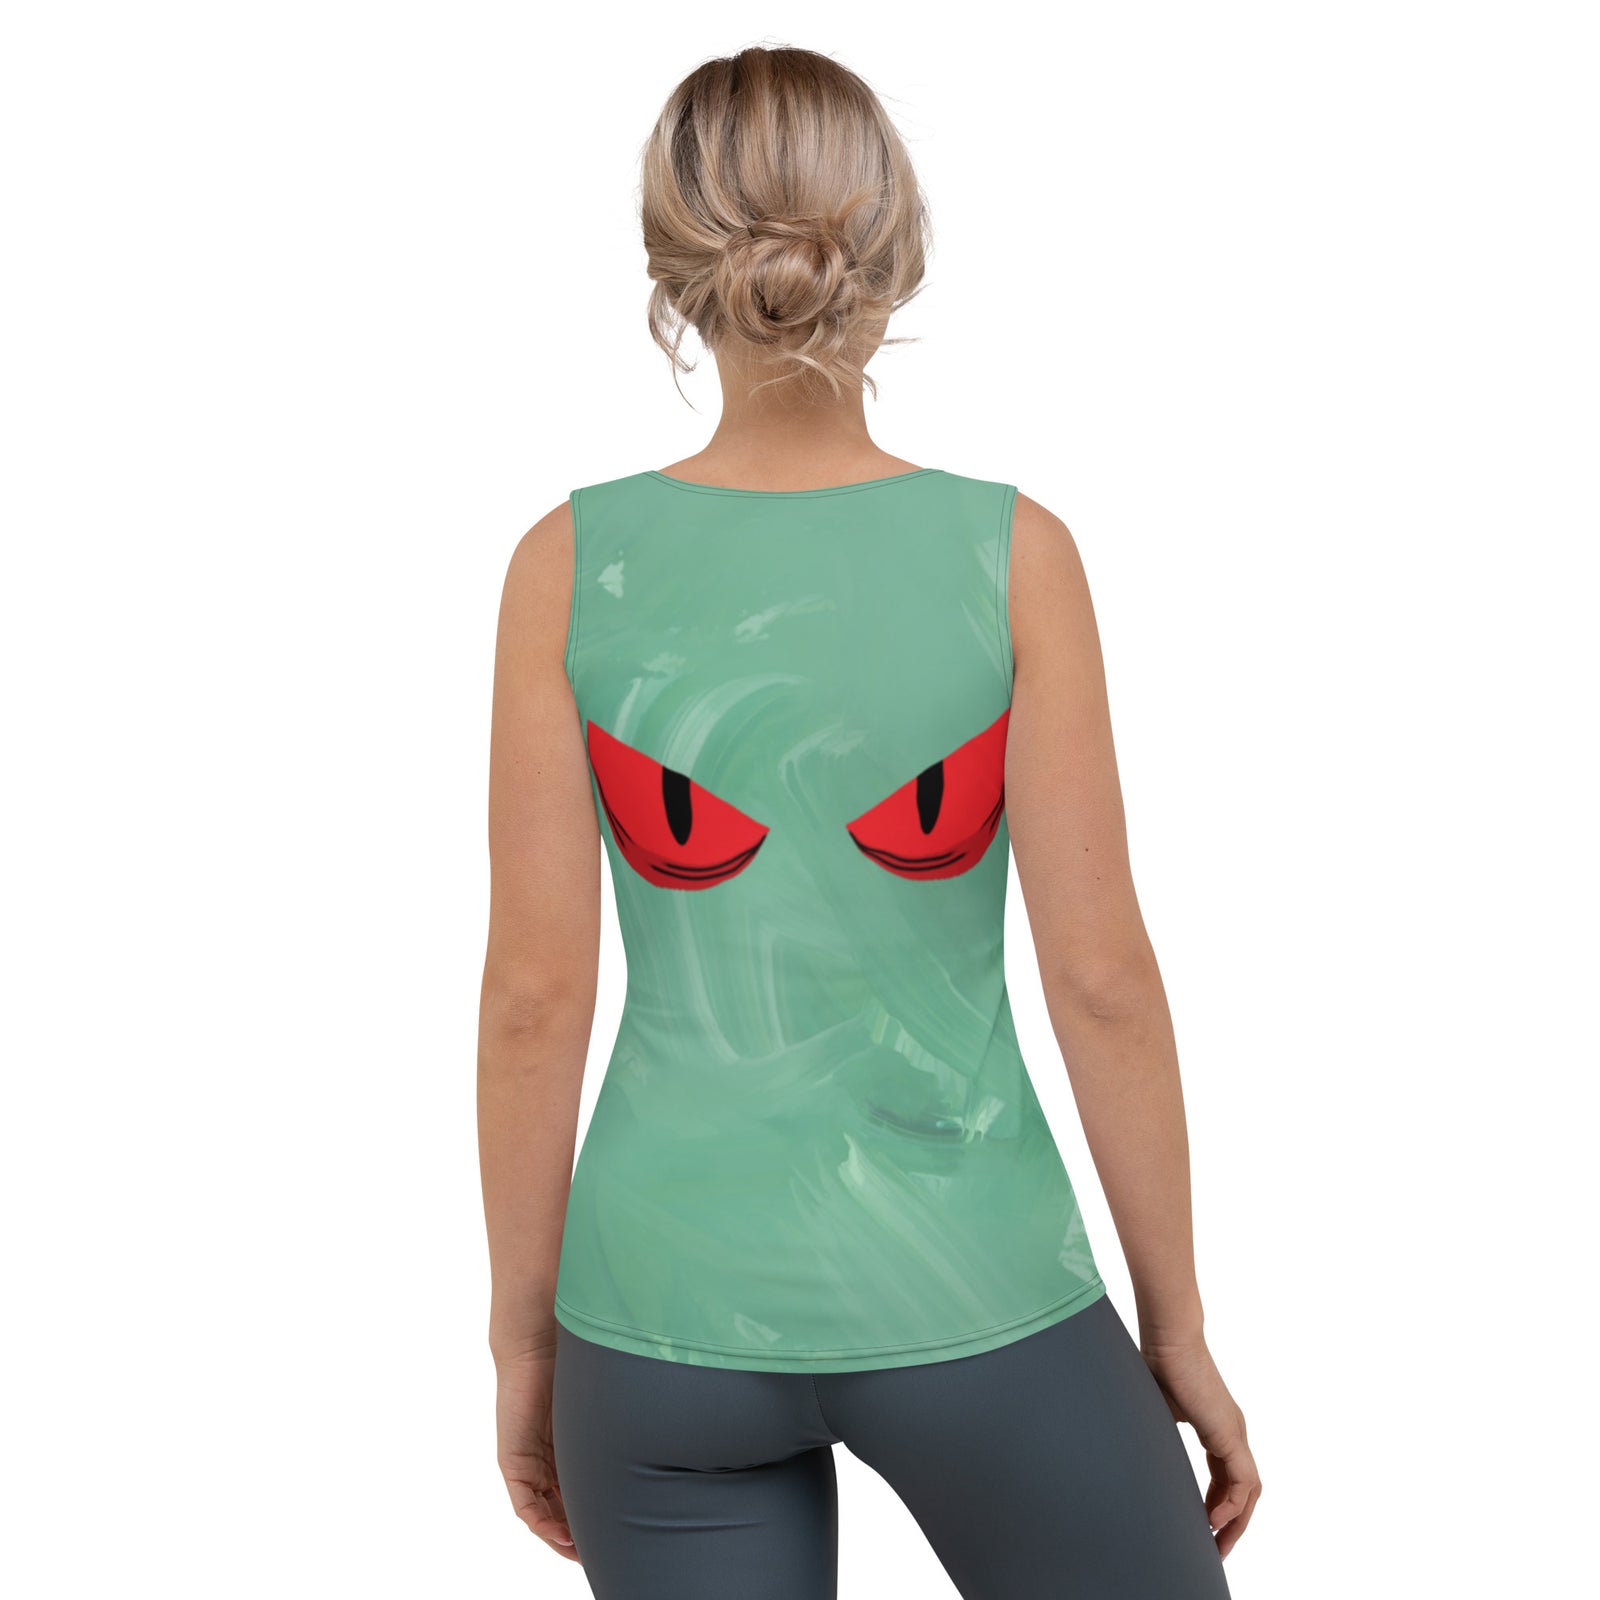 Red Cat Eye Sublimation Cut & Sew Tank Top